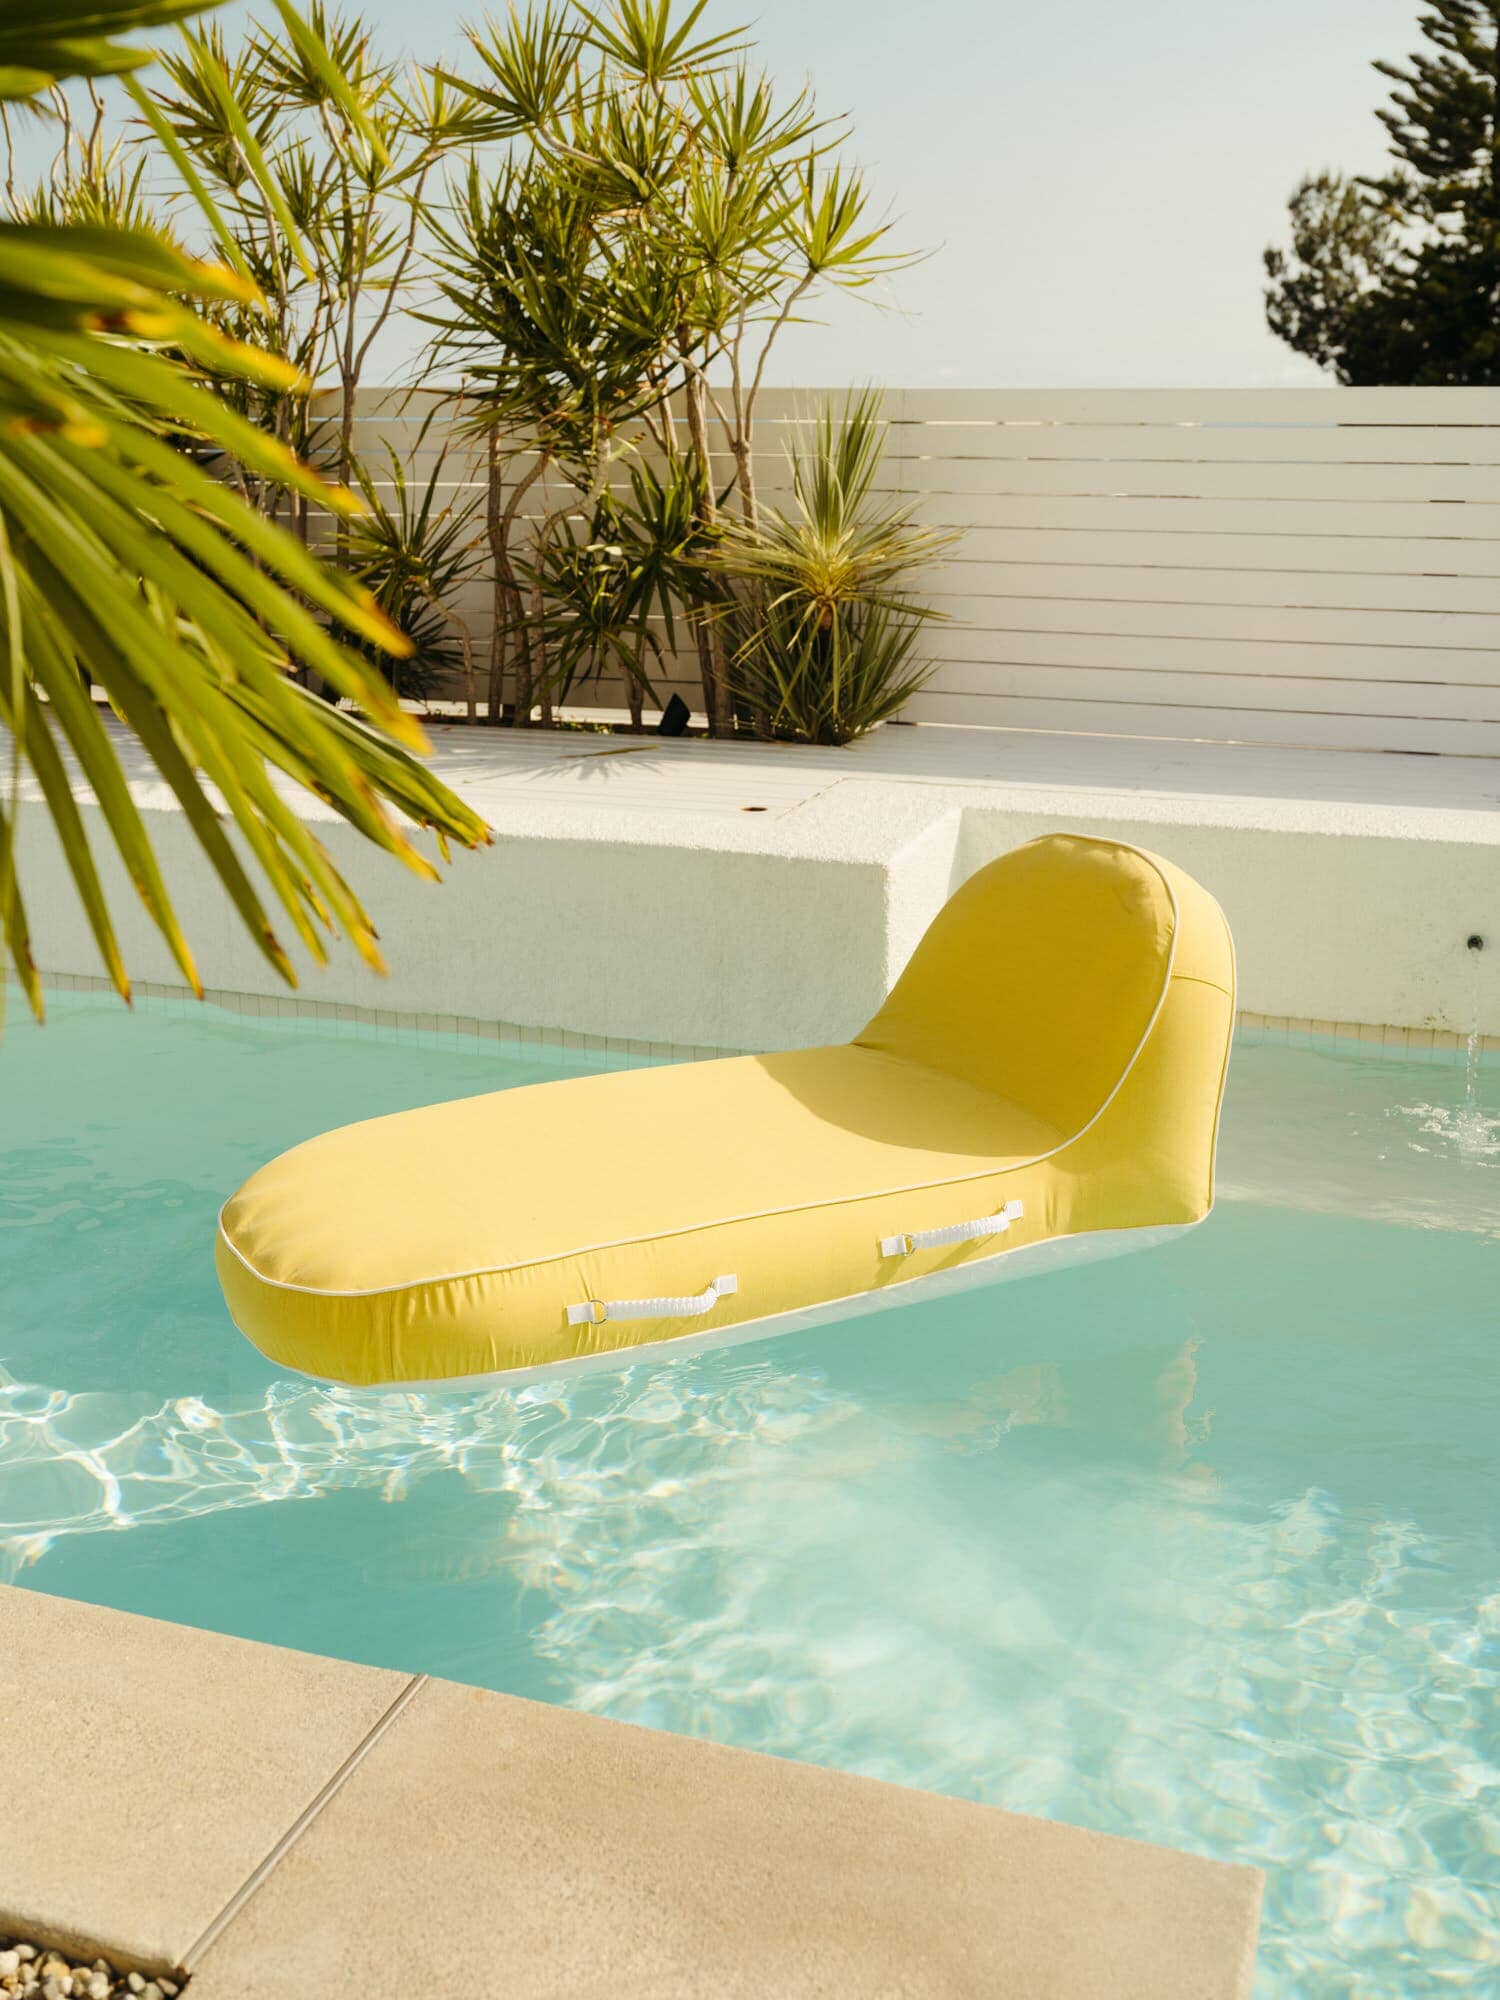 Riviera mimosa pool lounger in the pool